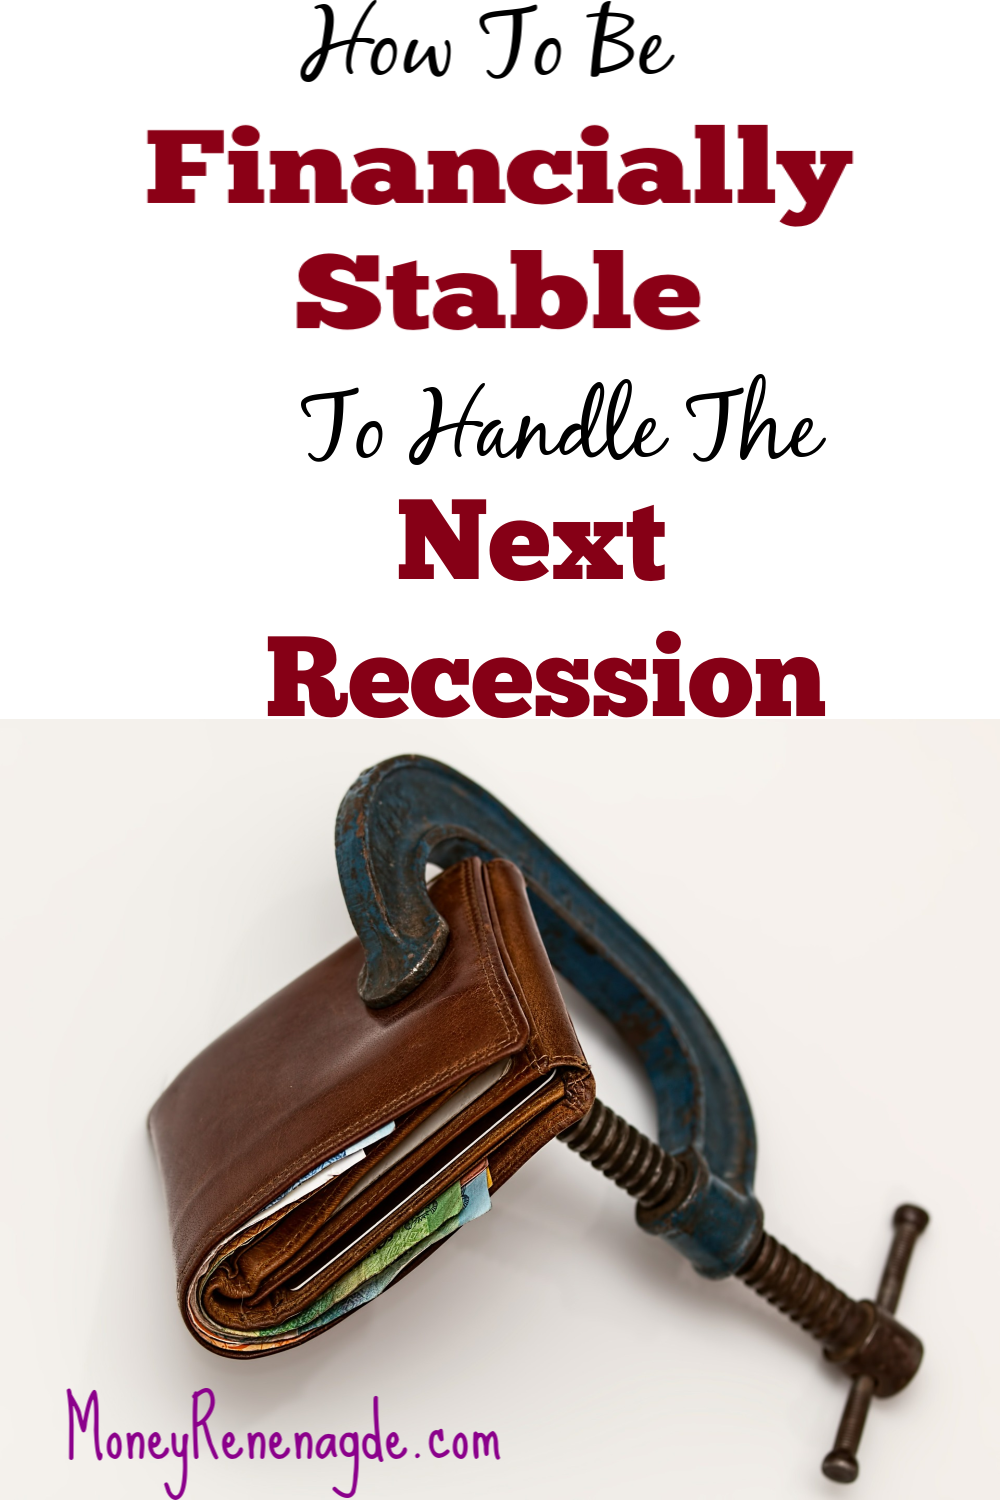 How To Be Financially Stable To Handle The Next Recession